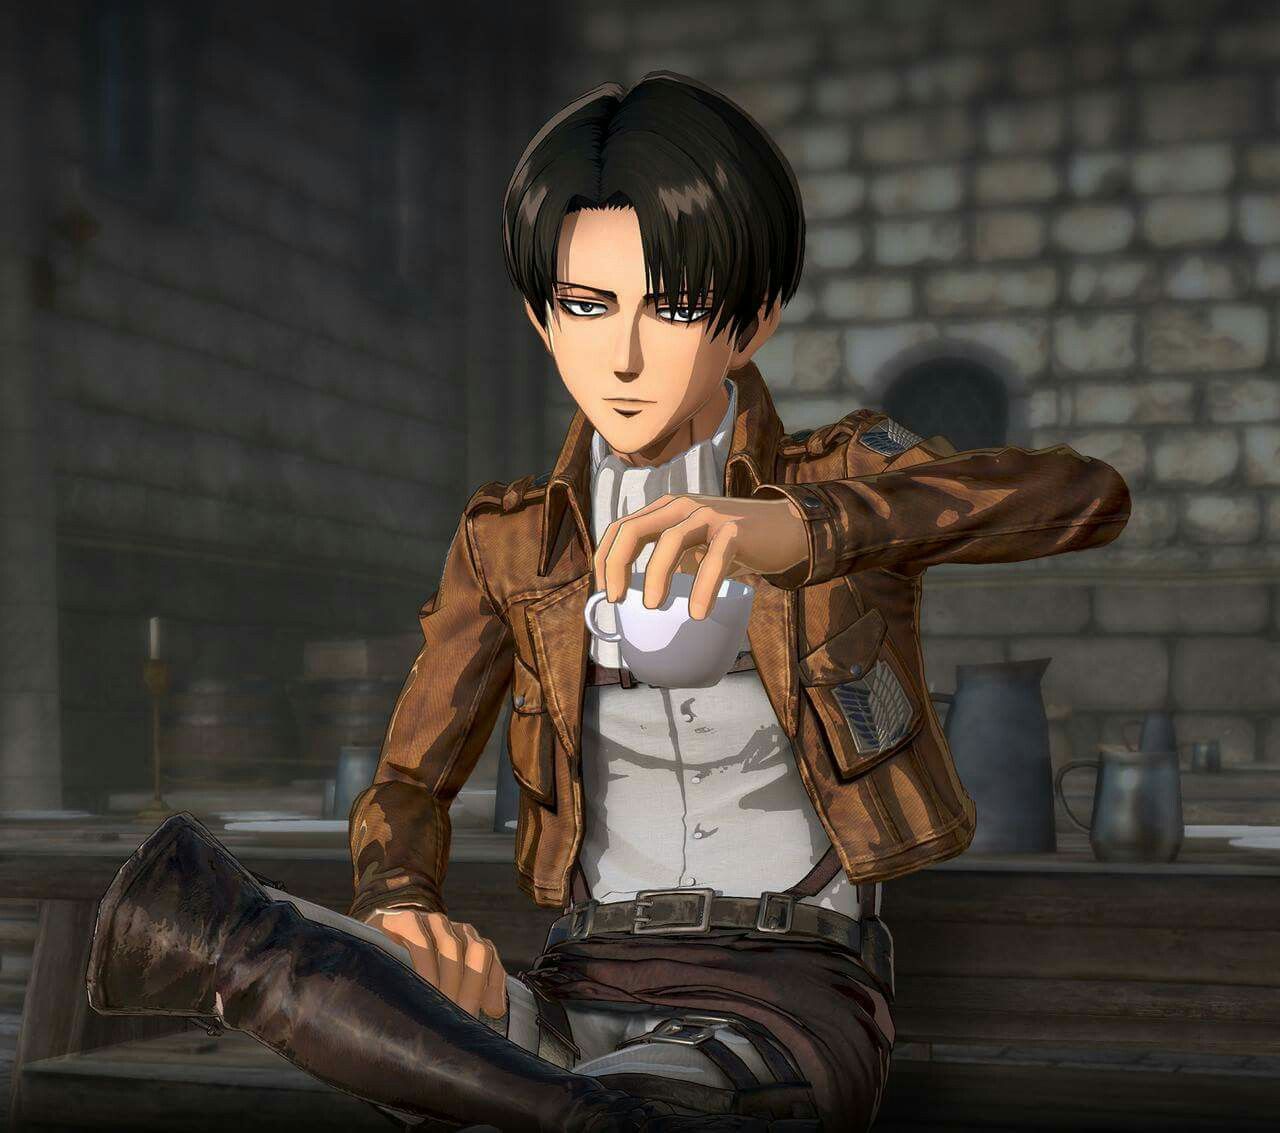 This Attack on Titan Mod brings Levi Ackerman to Monster Hunter World